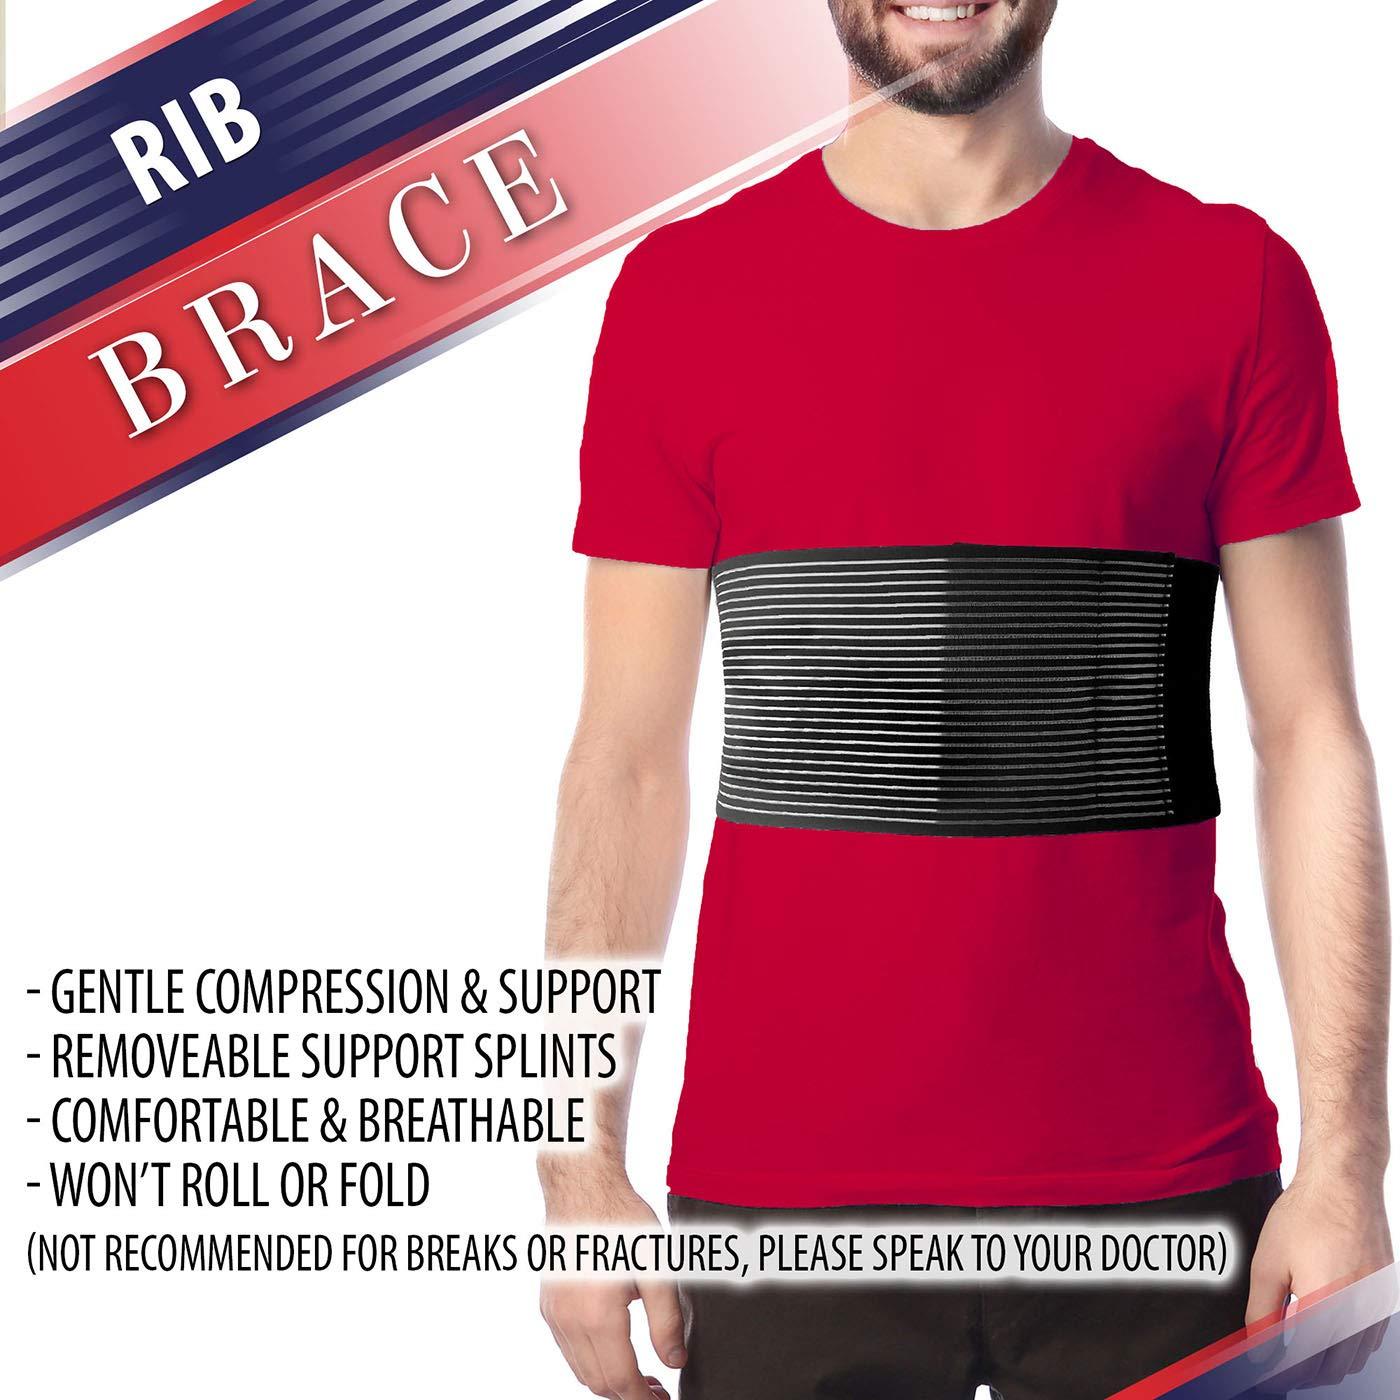  Rib Brace Chest Binder, Rib Belt to Reduce Rib Cage Pain, Chest Compression Support for Rib Muscle Injuries, Bruised Ribs, Breathable Chest Wrap Rib Brace for Women Men